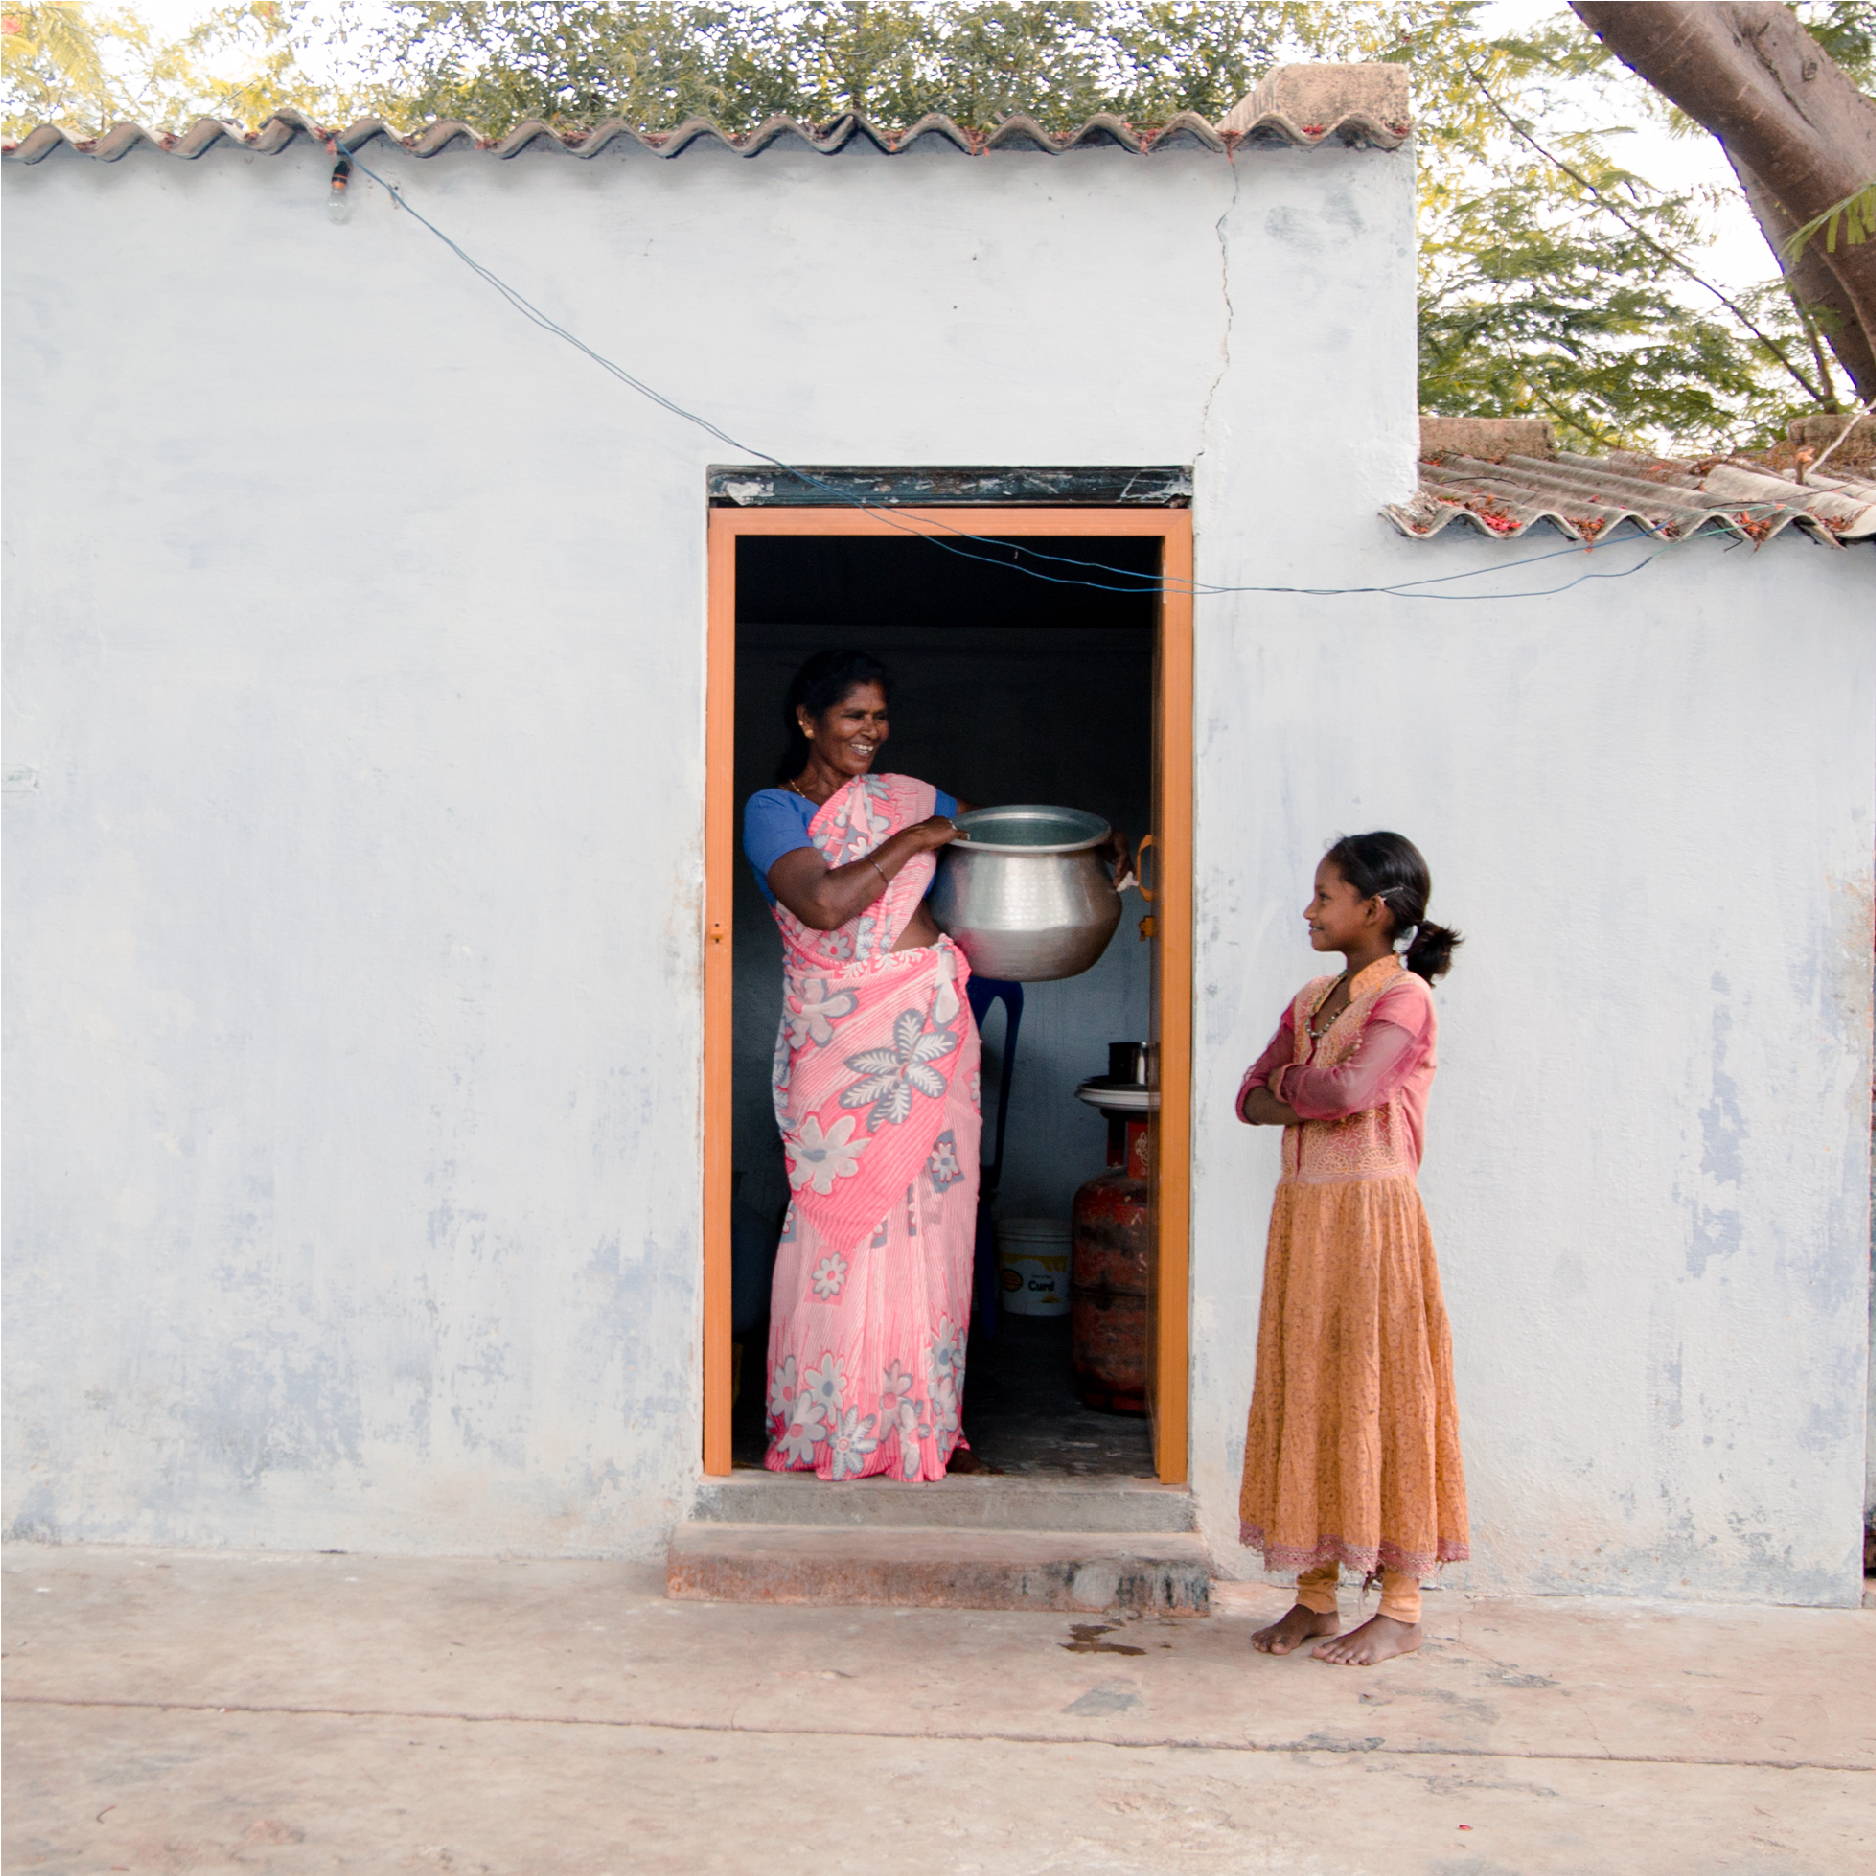 An Indian woman stands next to a young girl in a doorway holding a pot of food. 